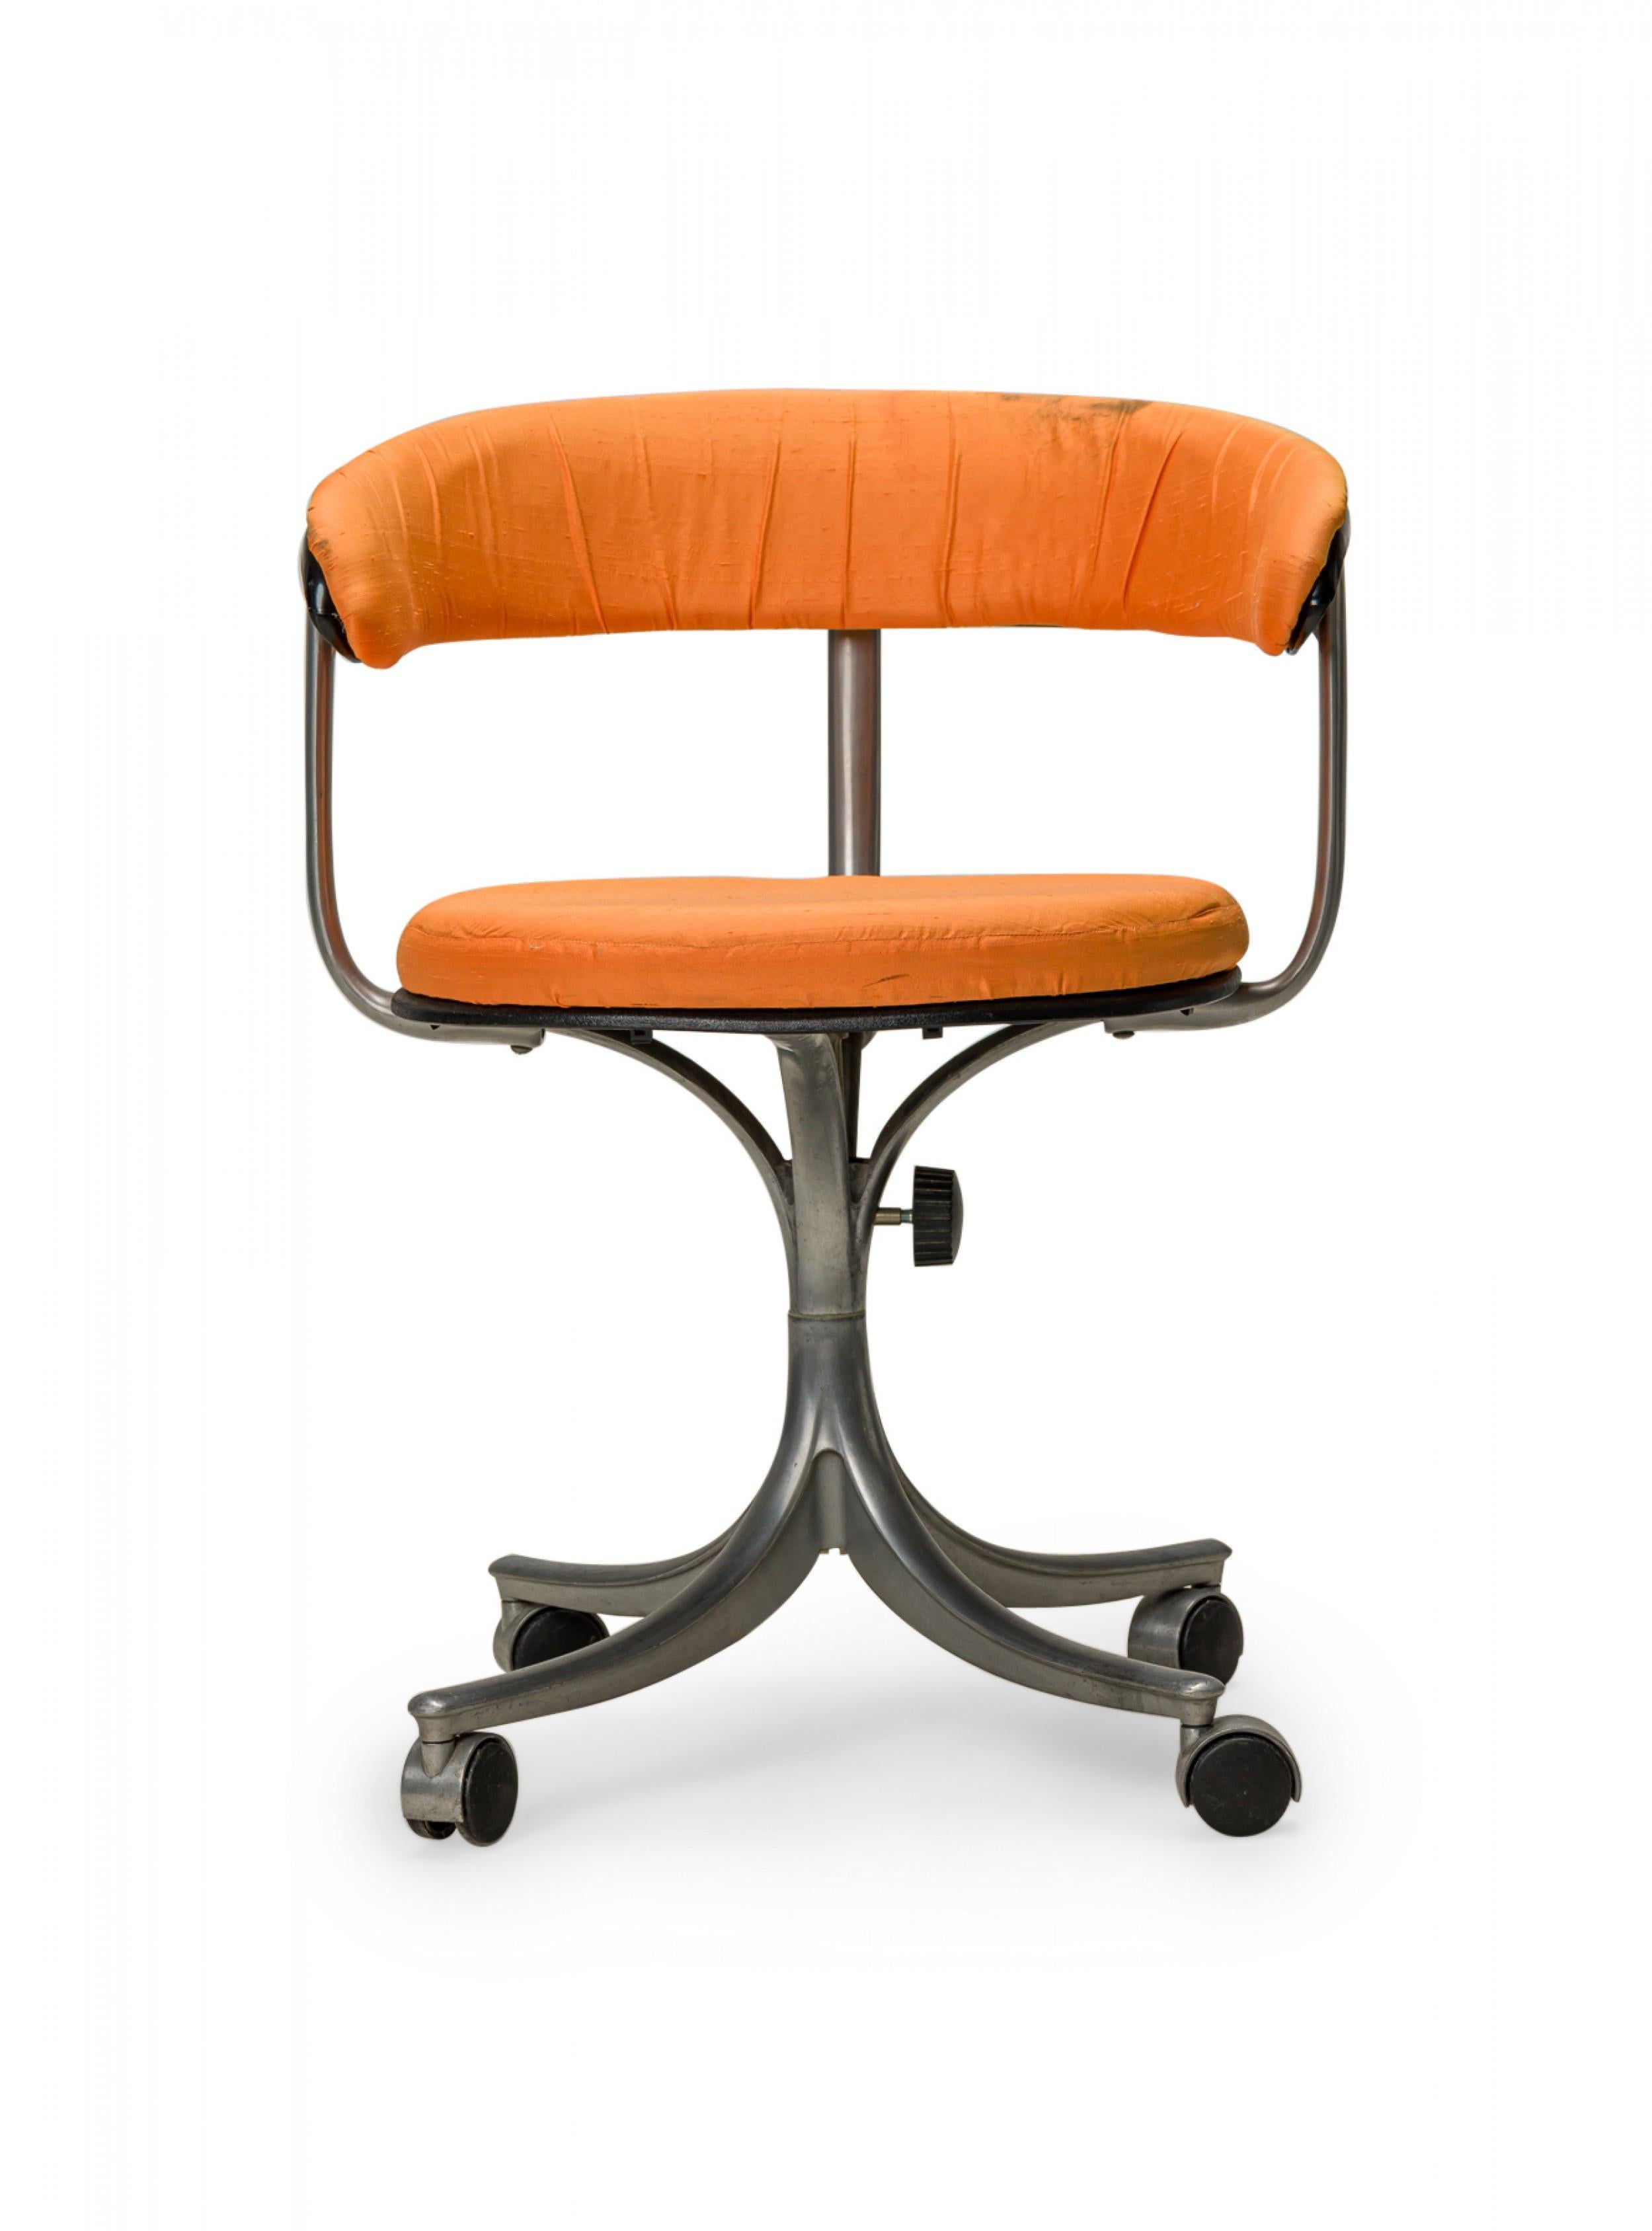 Danish Mid-Century rolling / swivel office chair with a U-shaped back and orange fabric seat and back upholstery, supported by a matte silver metal frame and pedestal base with four legs and four casters. (JØRGEN RASMUSSEN)
